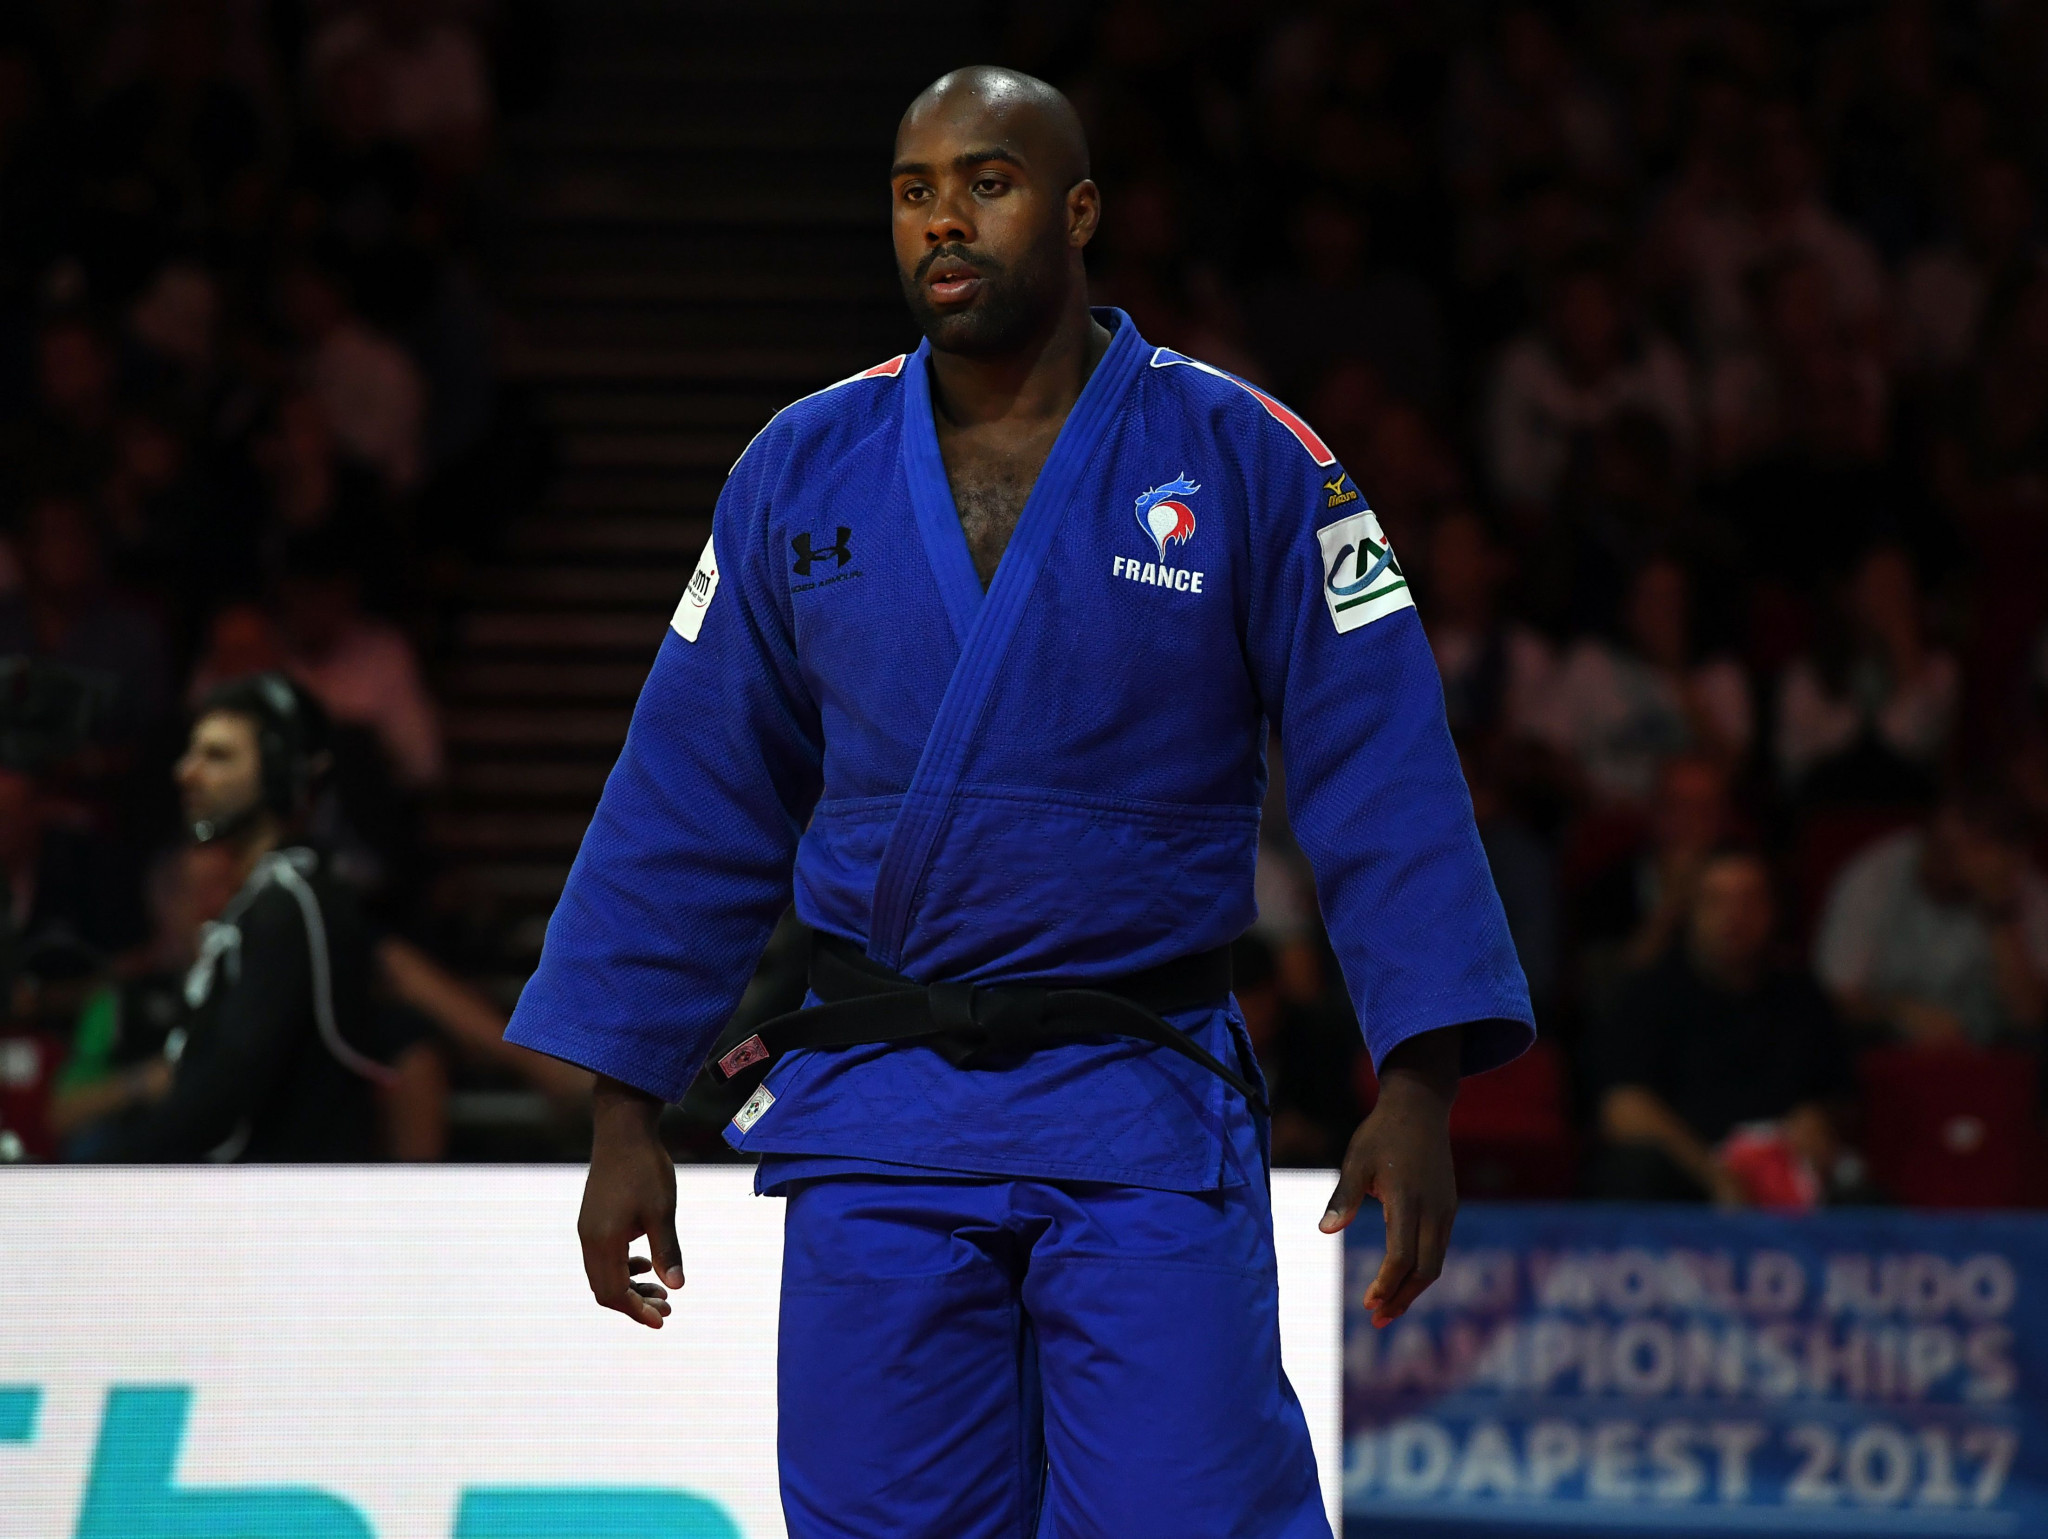 Double Olympic champion Teddy Riner, who recently secured his ninth world title and has won his last 138 matches in a row, will help re-open the judo section of the famous French club ©Getty Images